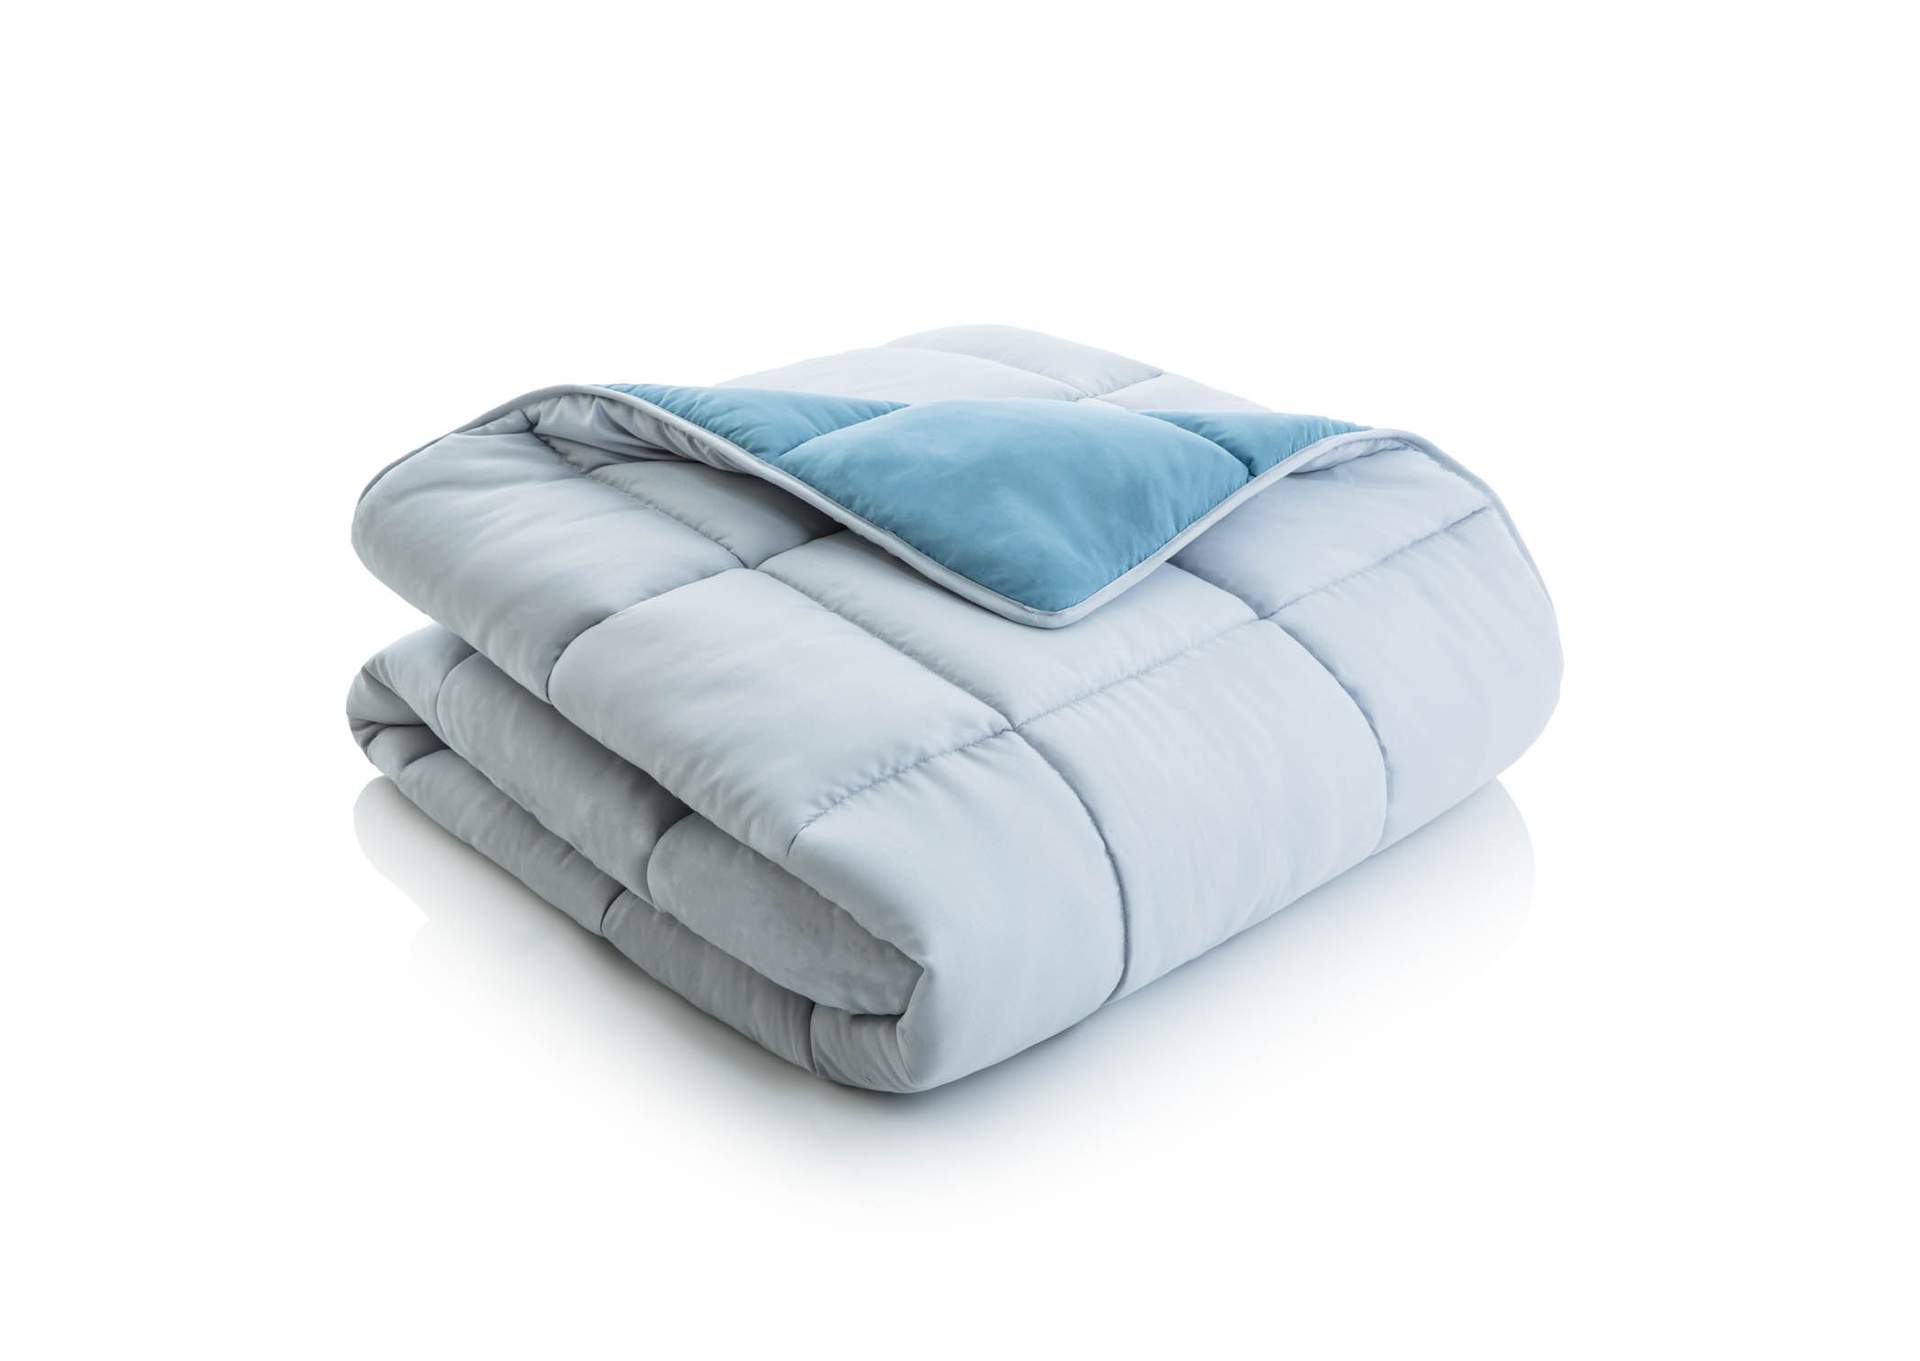 Malouf White Bed in a Bag Reversible Comforters & Duvets - King Size,Malouf